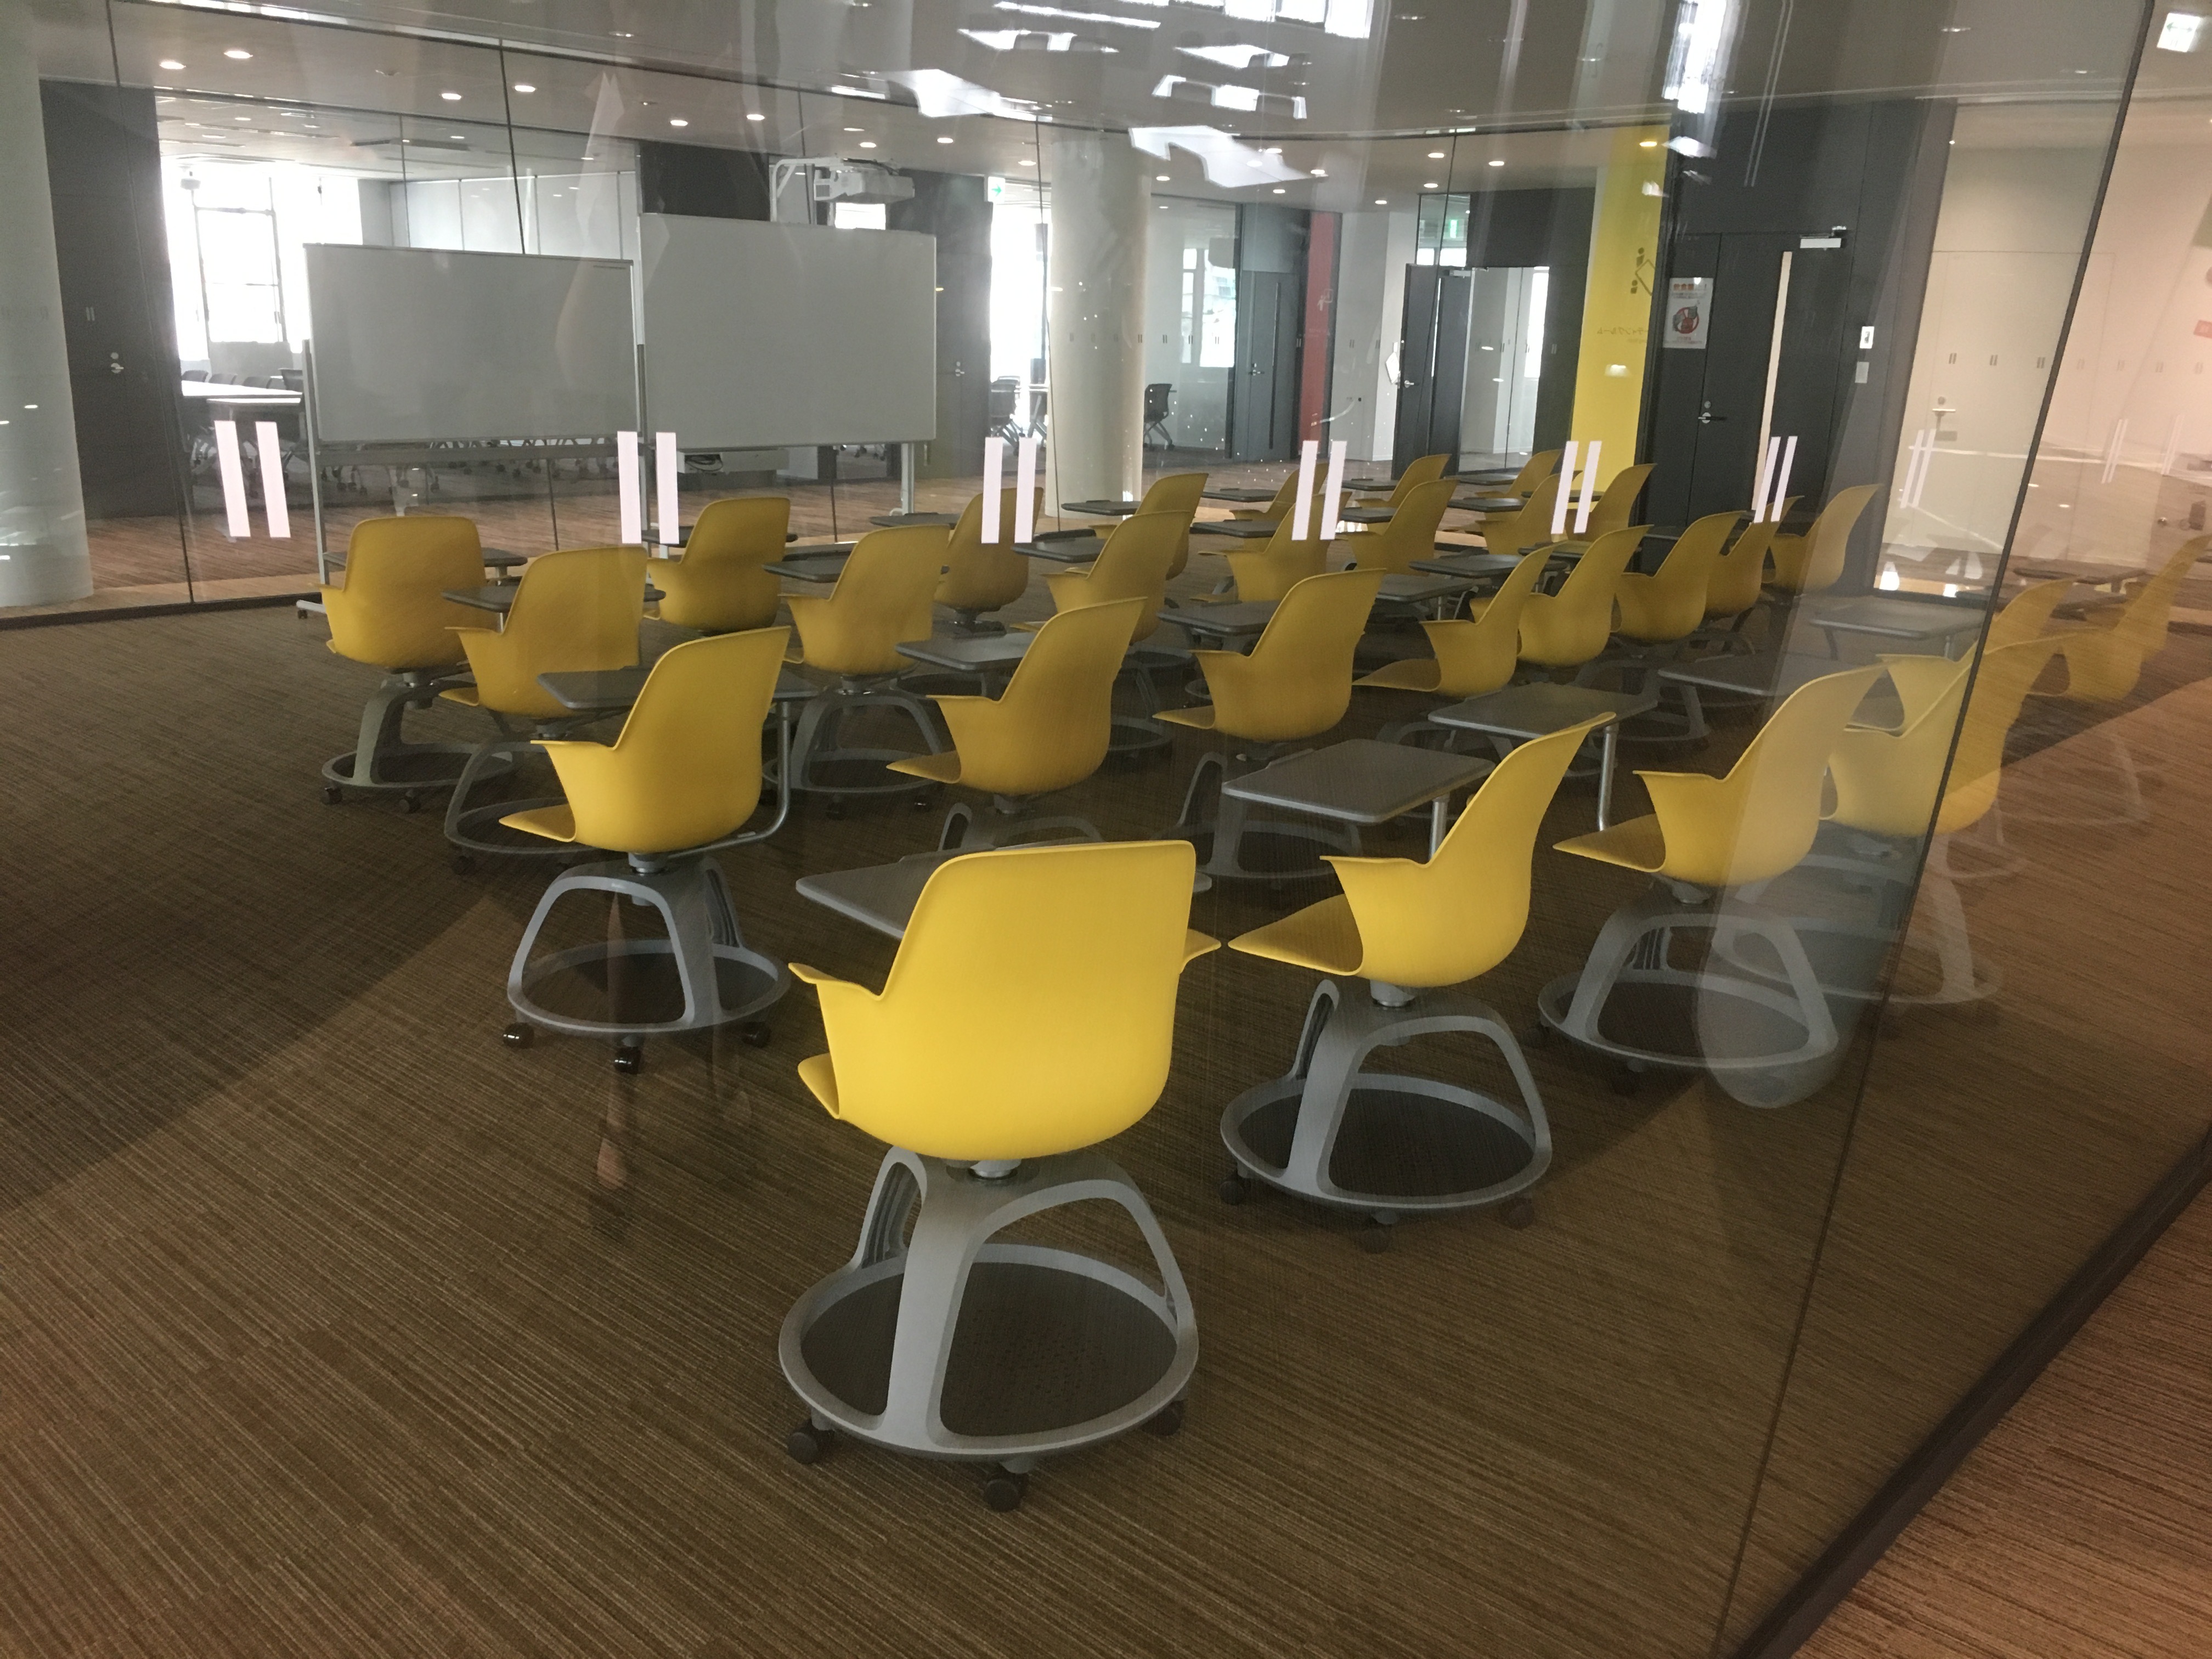 A classroom of yellow chairs that all have round trays attached underneath.